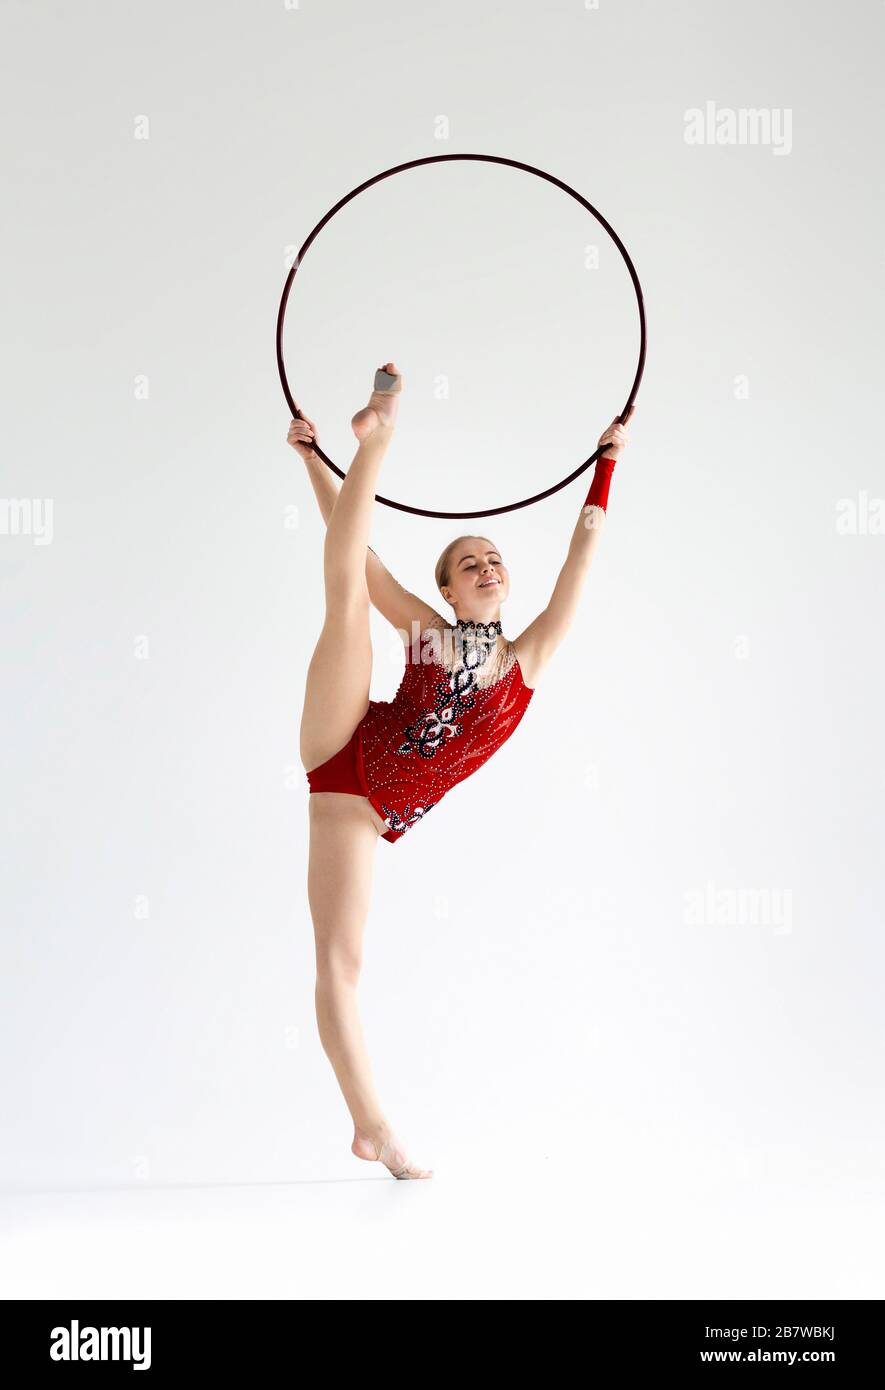 Professional athlete doing complicated gymnastic trick with hoop on white background Stock Photo